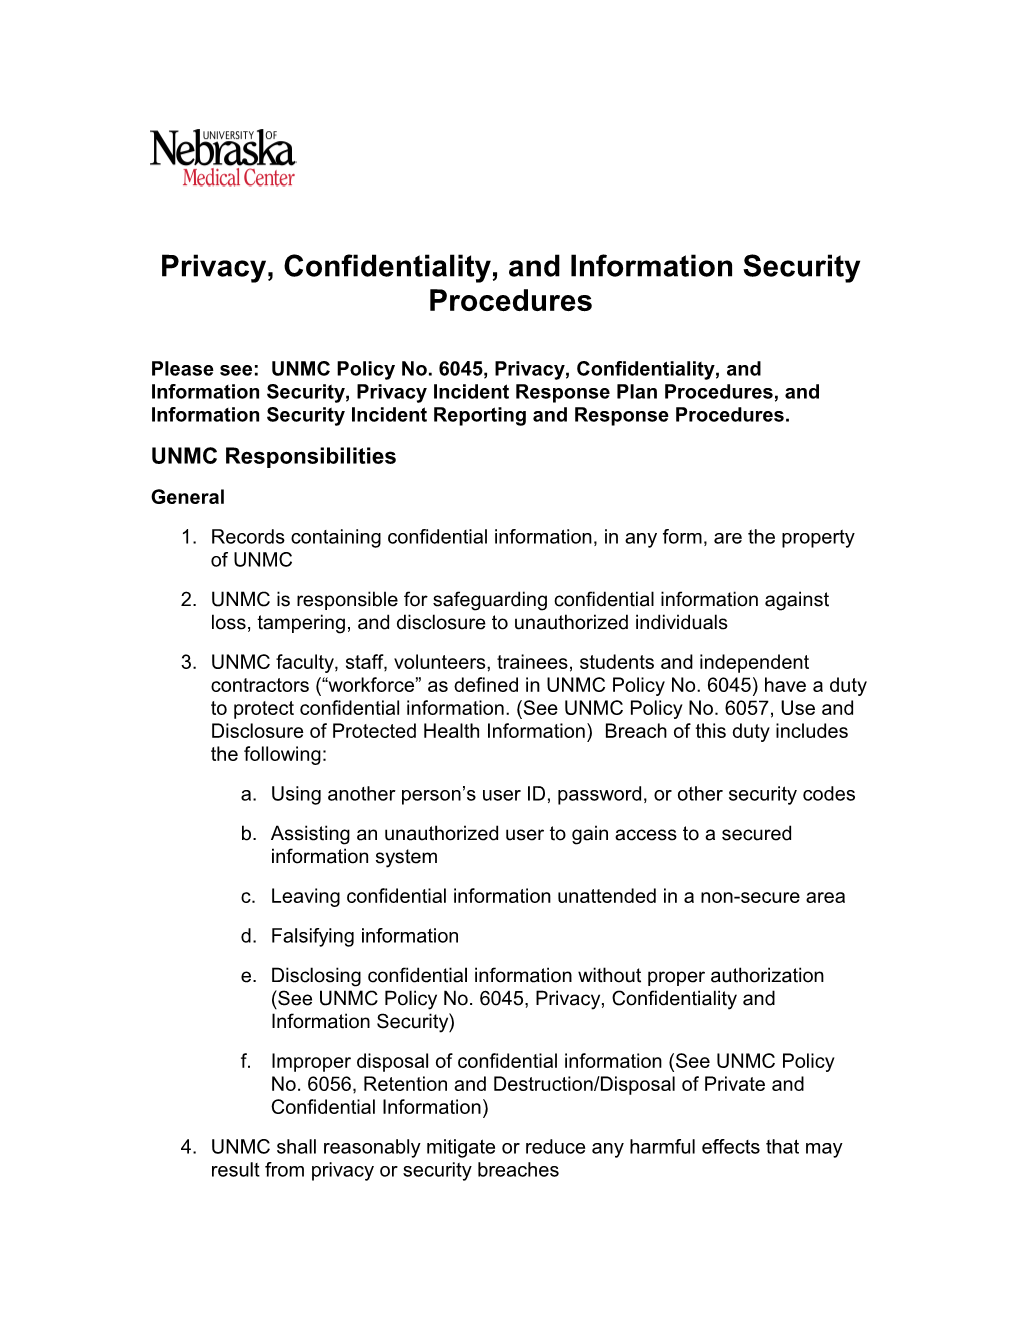 Privacy, Confidentiality, and Information Security Procedures